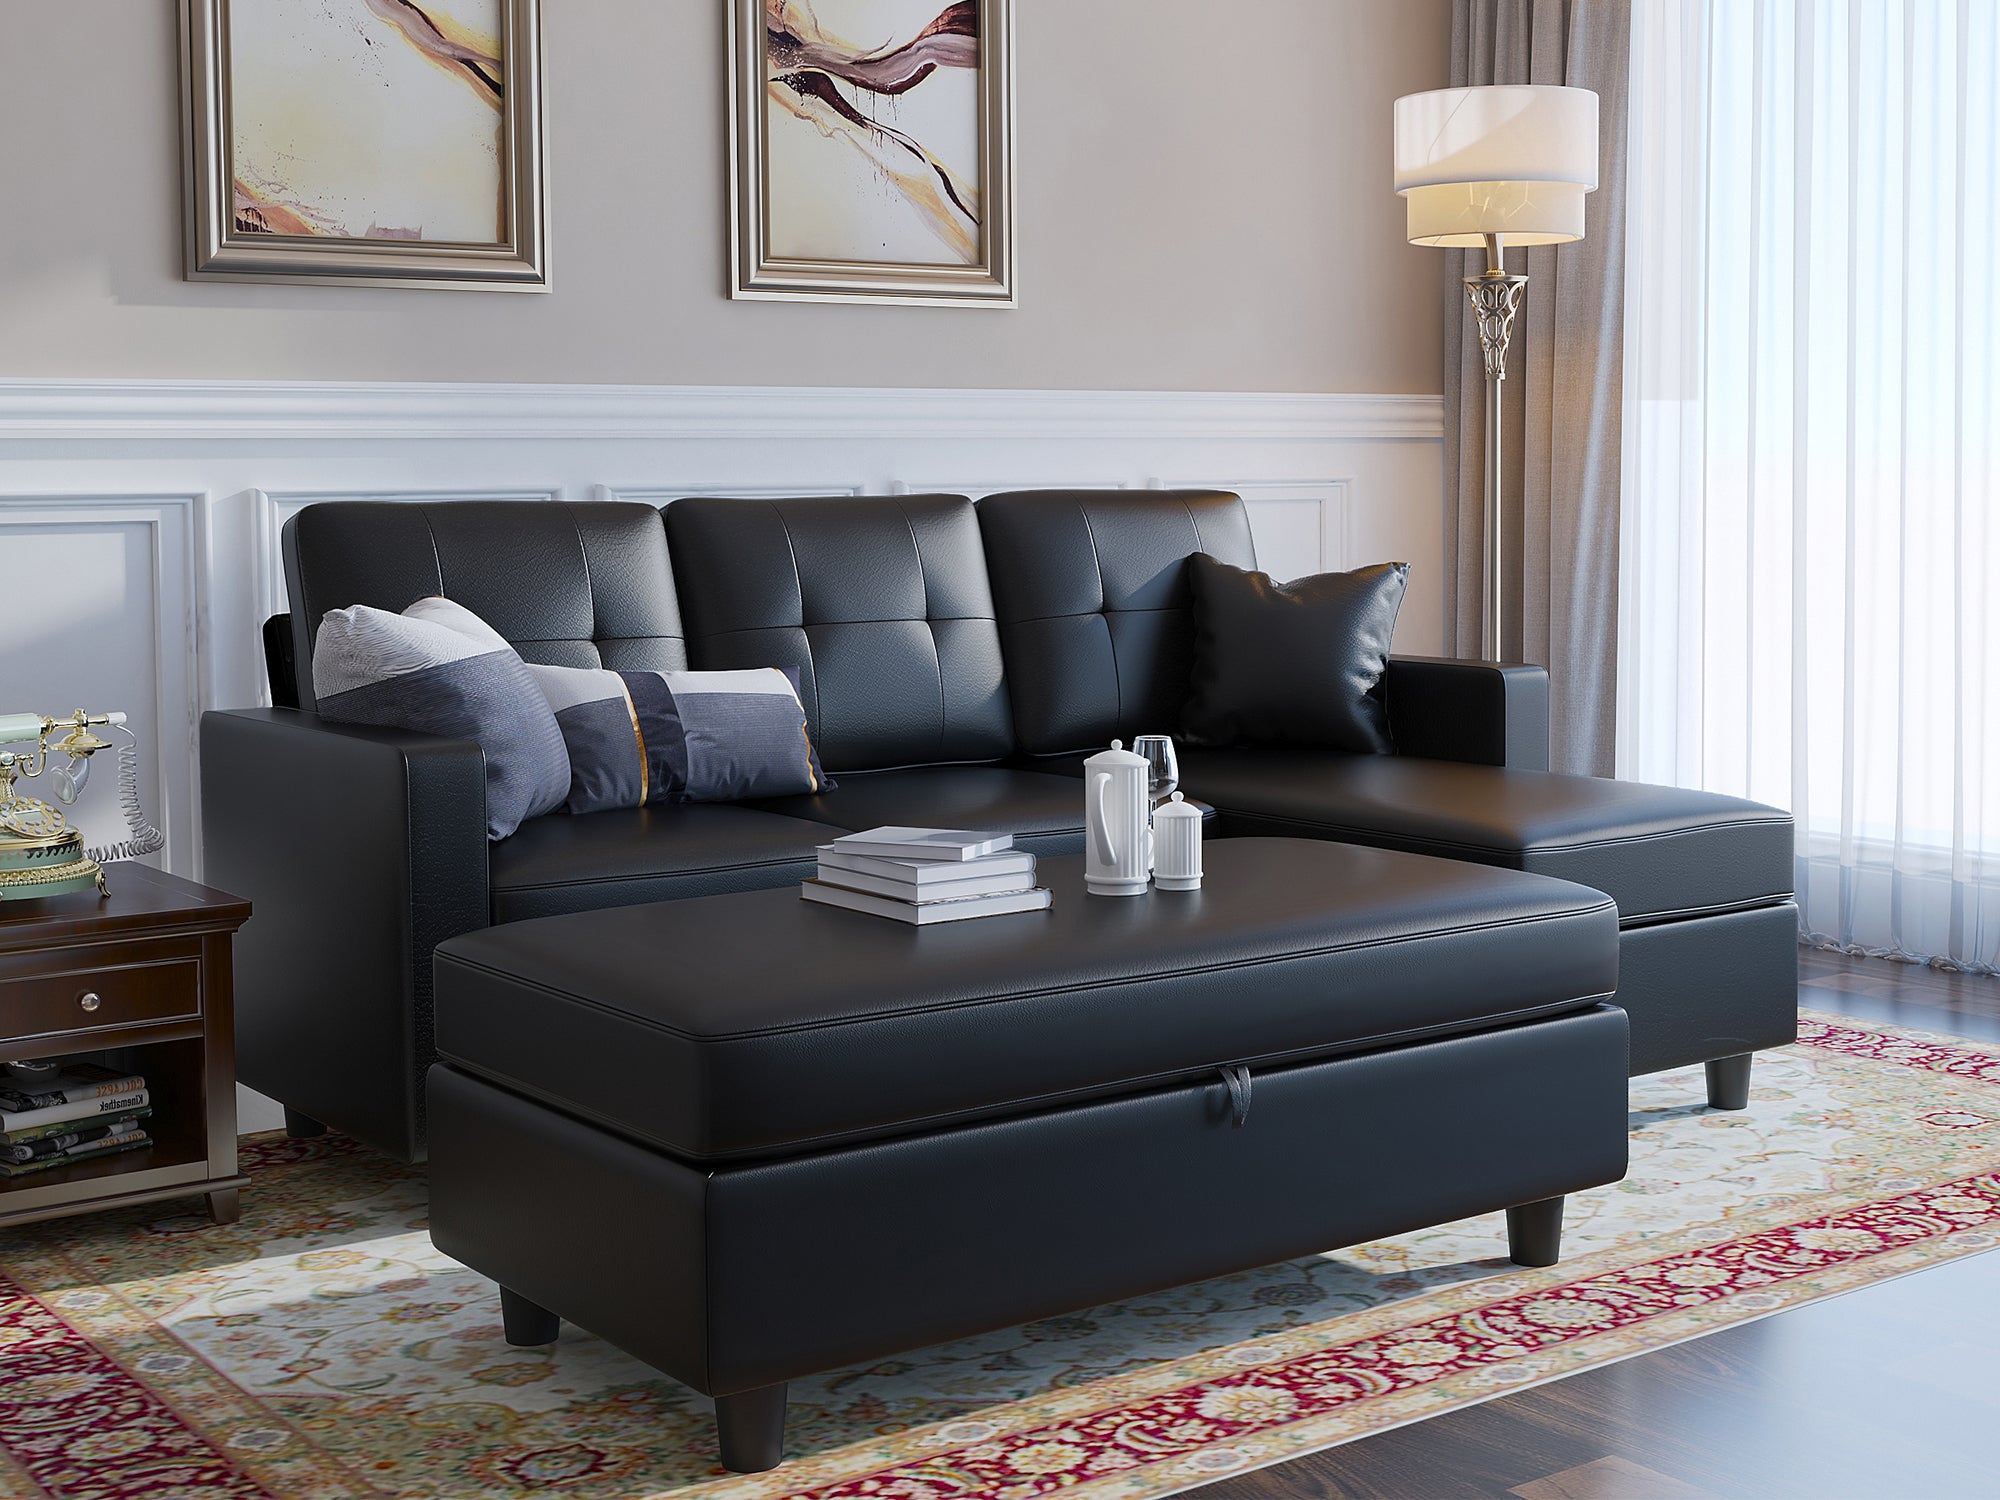 HONBAY L-Shaped Sectional Sofa Set with Storage Chaise & Ottoman